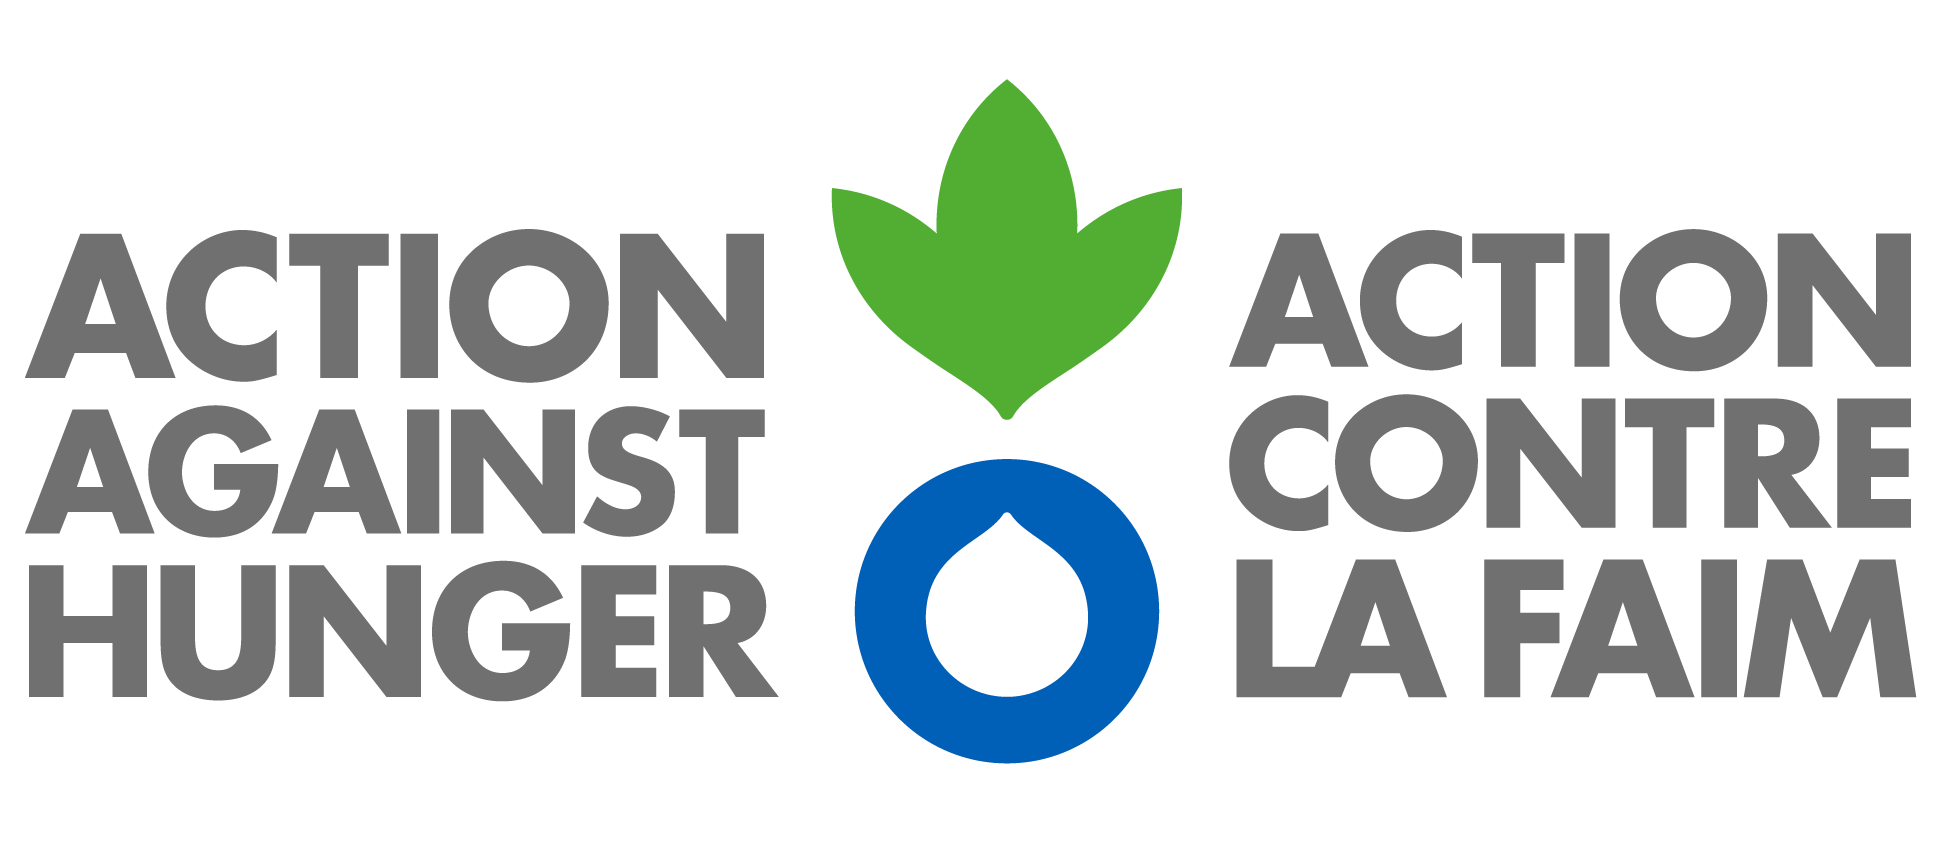 Action Against Hunger Canada logo